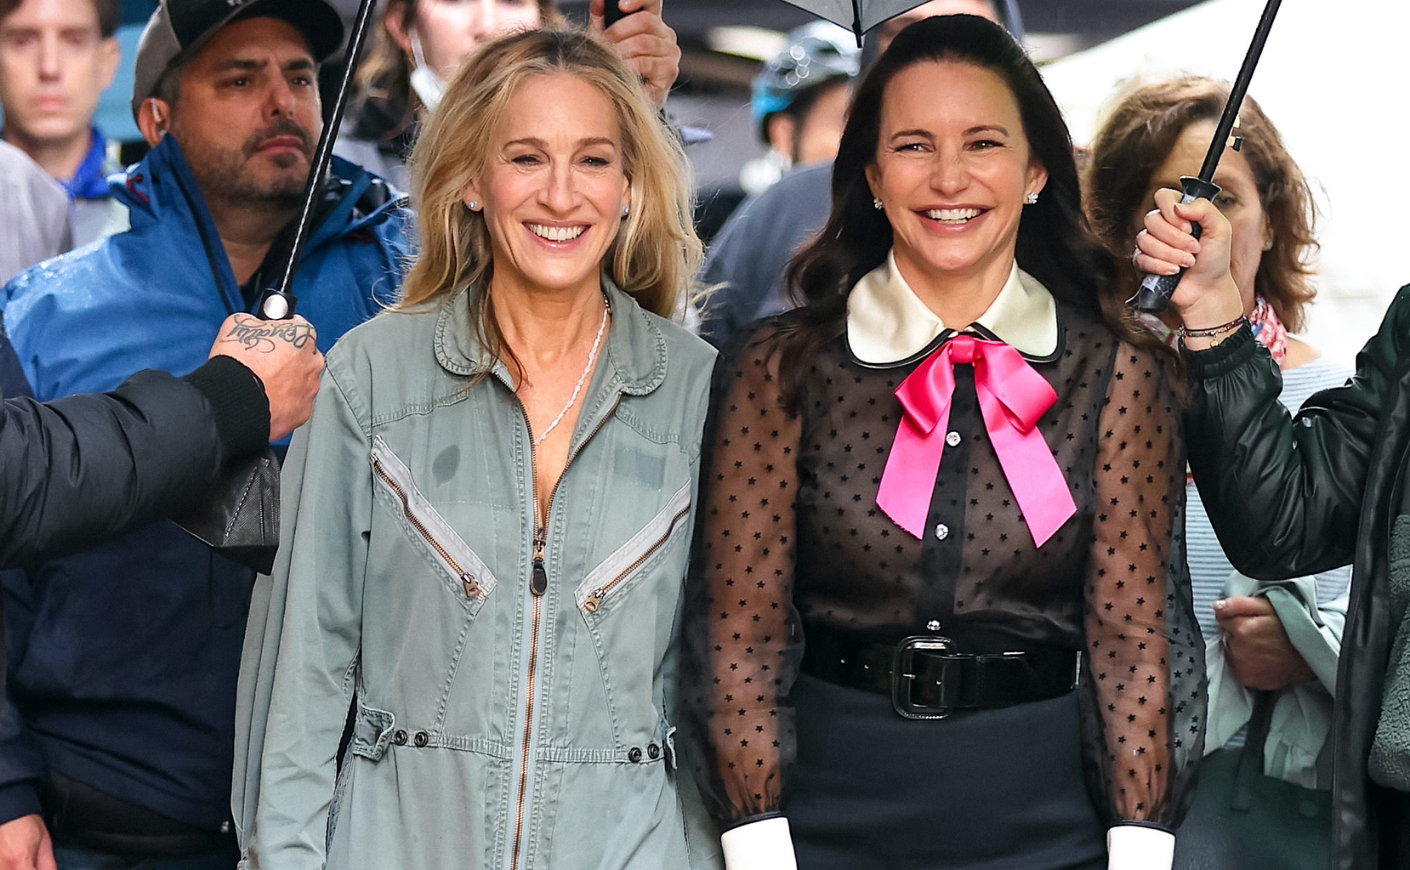 Sarah Jessica Parker Carries $890 Pigeon Purse on 'And Just Like That